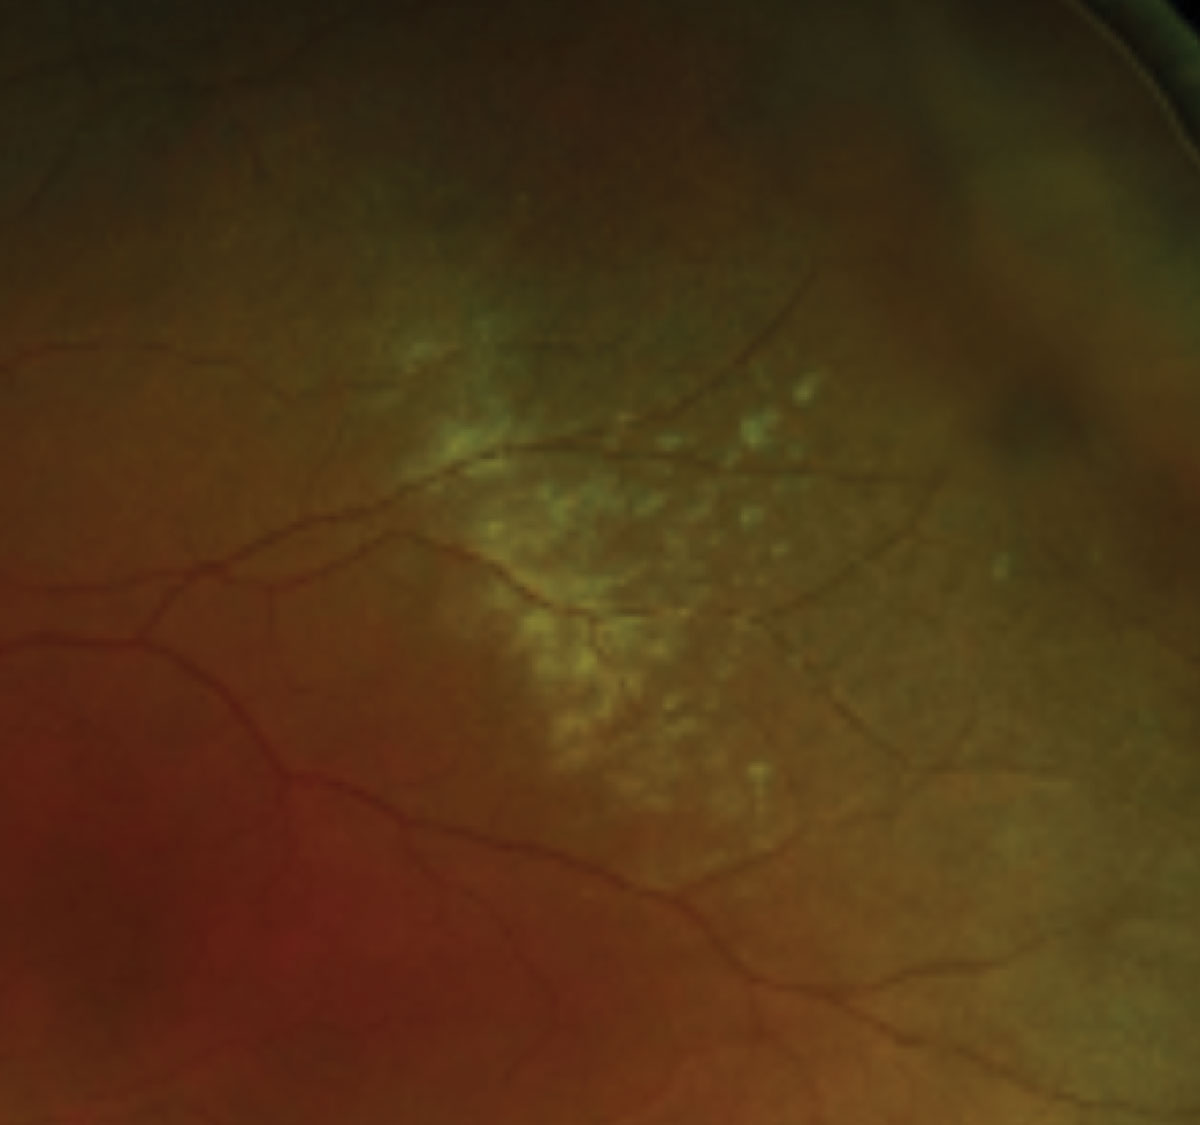 Magnified view of commotio retinae highlighting a confluent area of retinal whitening in the mid-periphery.